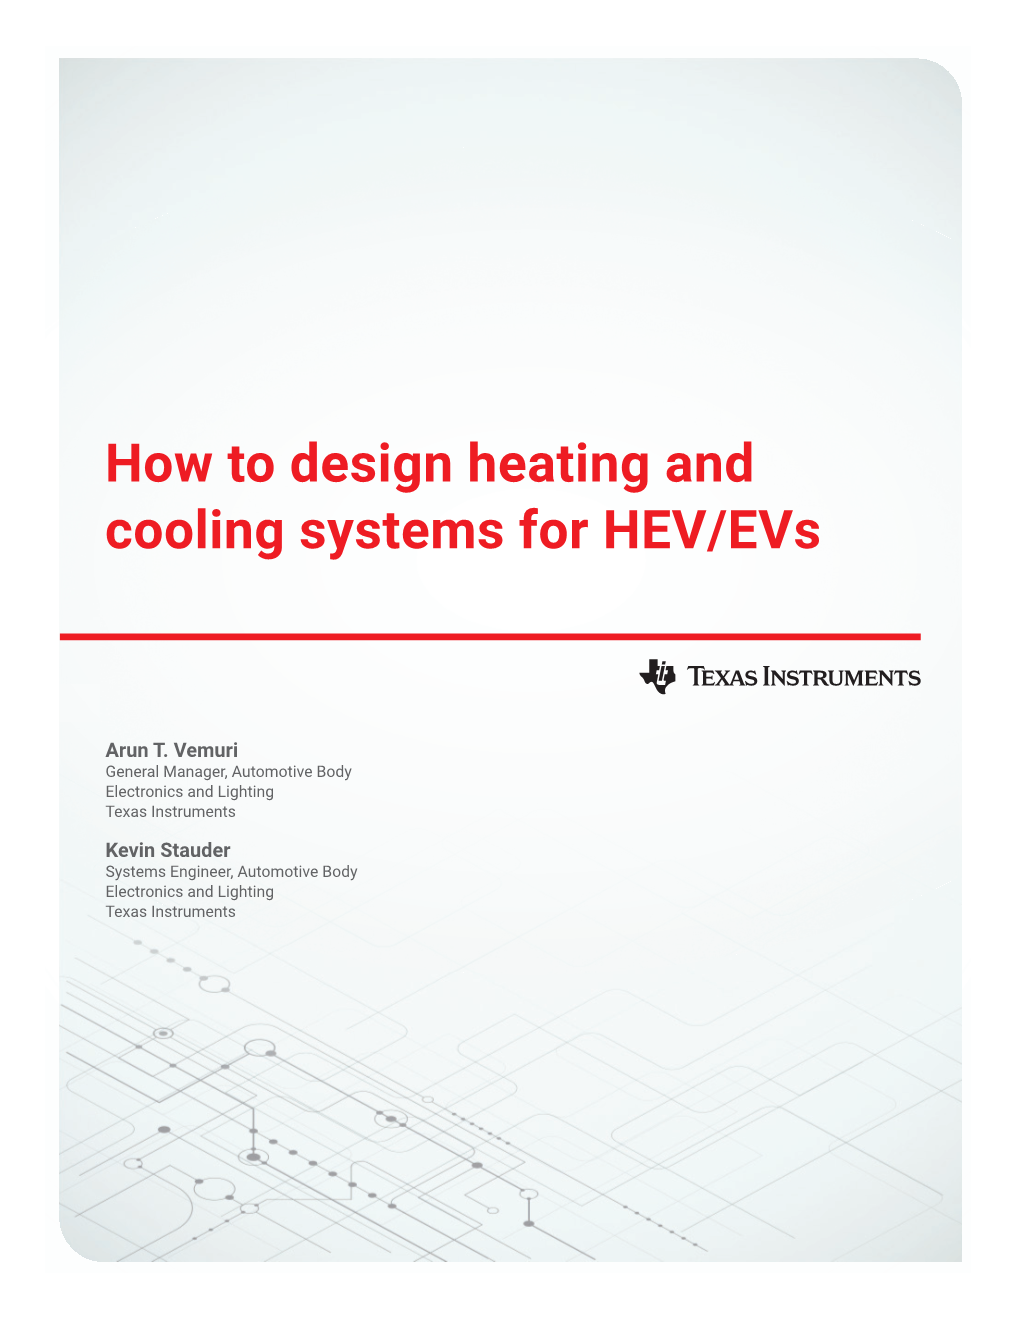 How to Design Heating and Cooling Systems for HEV/Evs